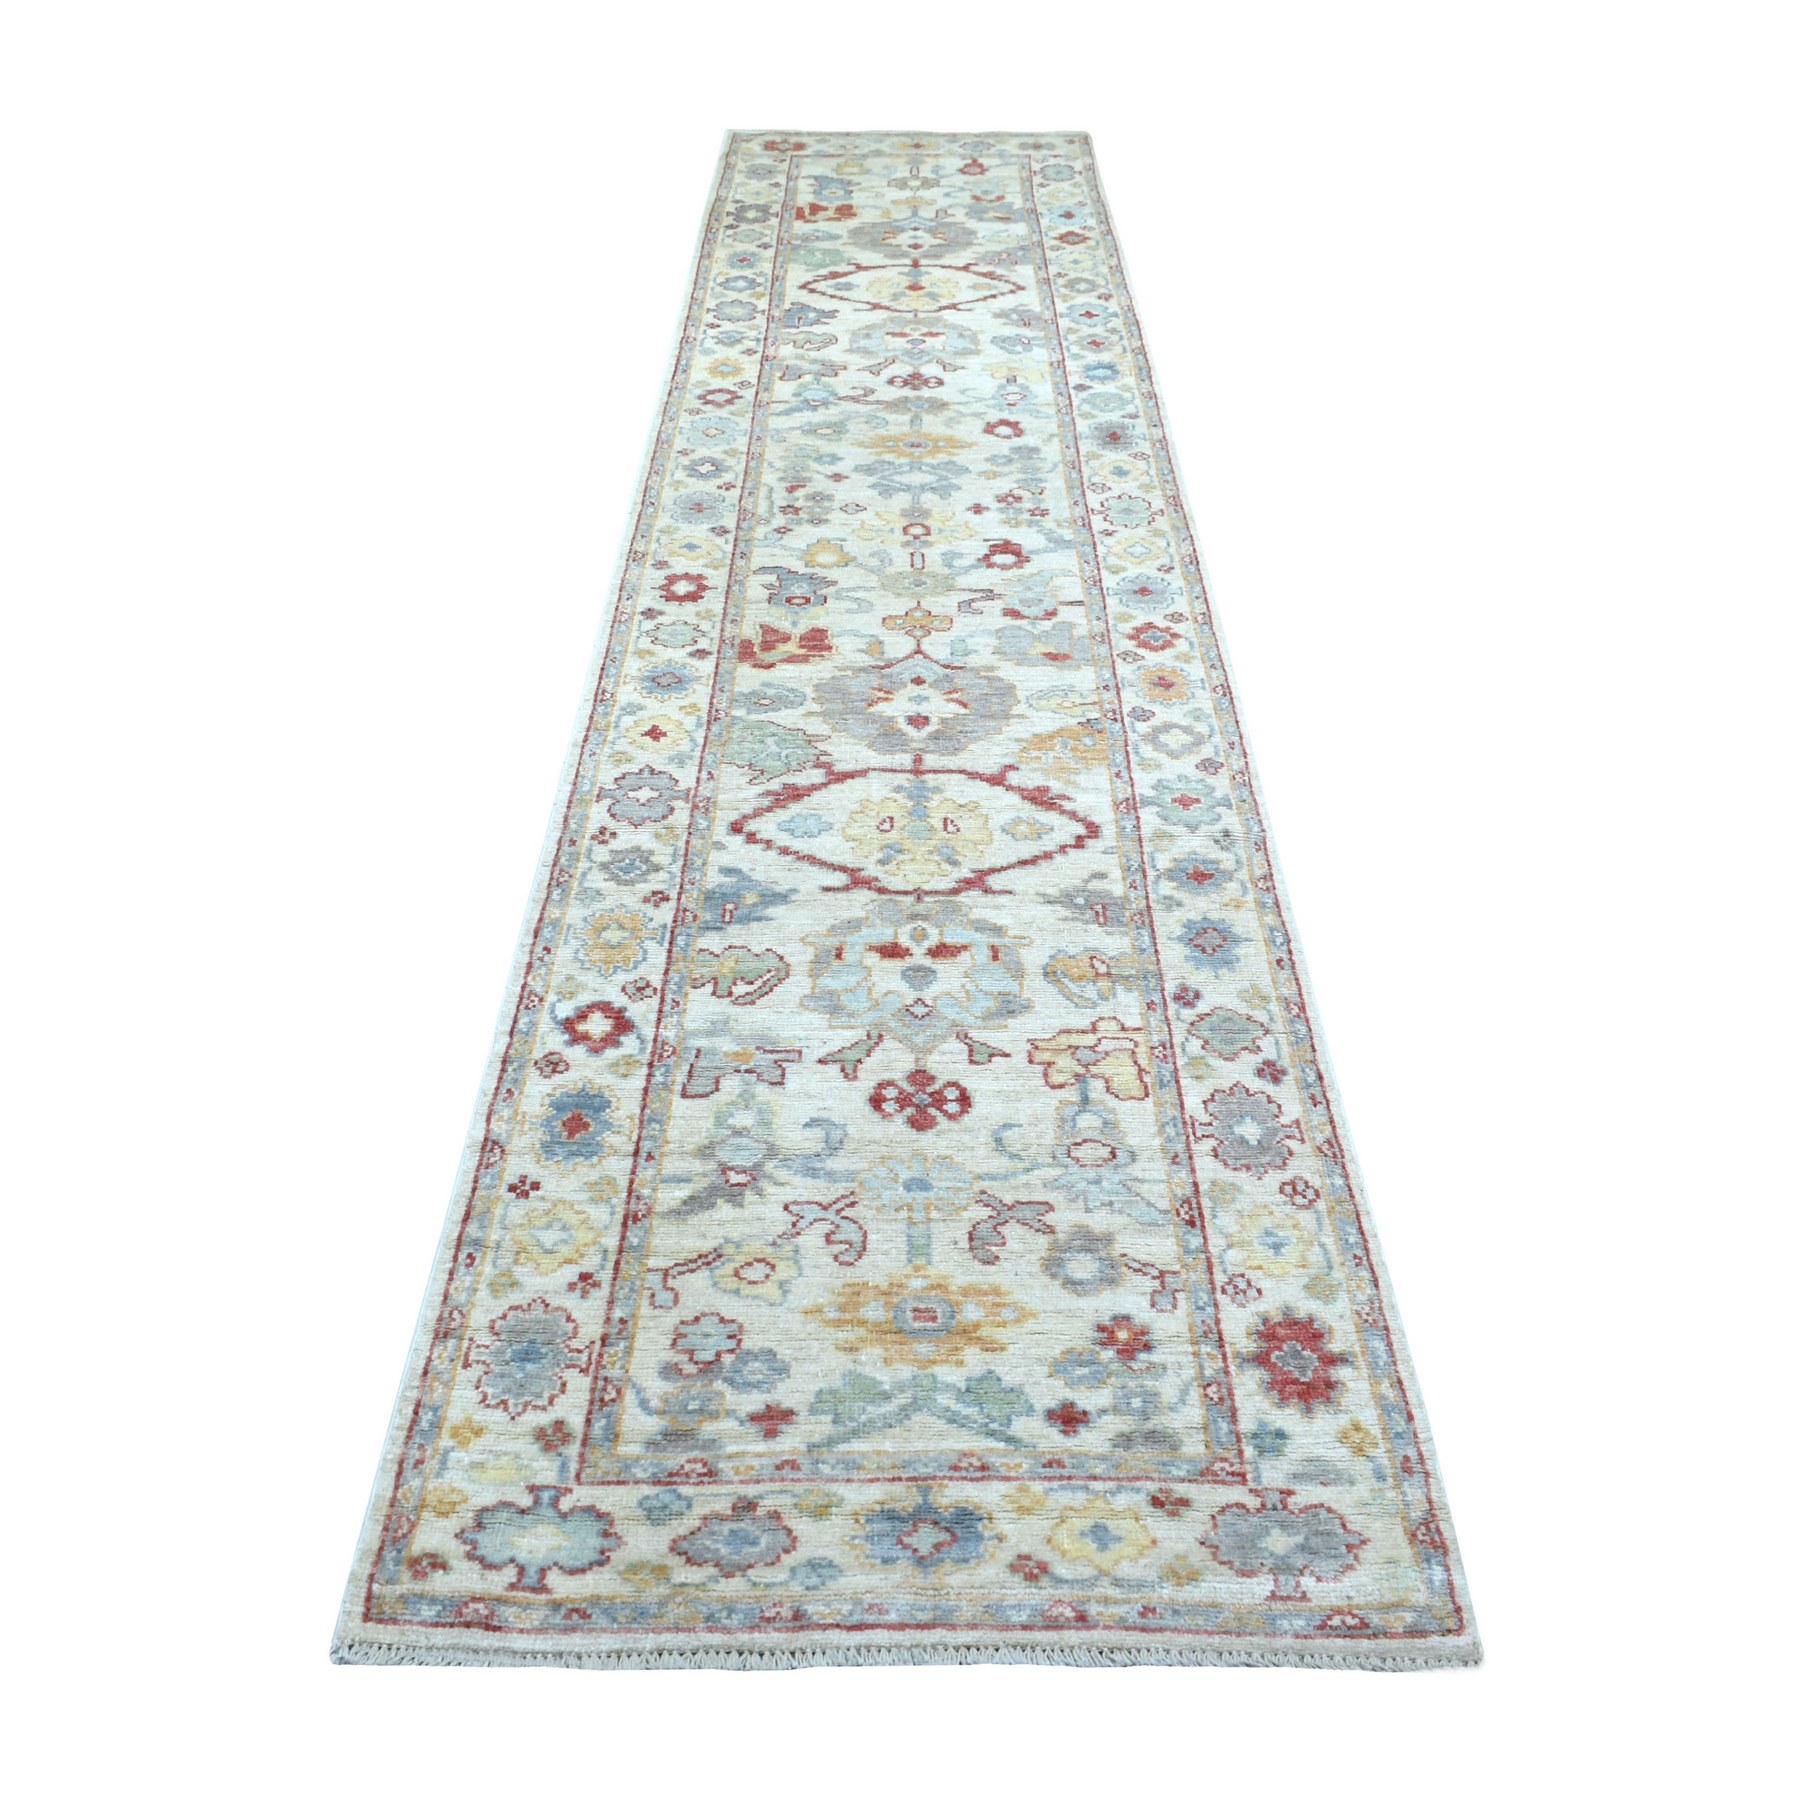 3'2"x13'4" Afghan Angora Oushak Ivory with Pop of Colors Hand Woven Extra Soft Wool Oriental Wide Runner Rug 